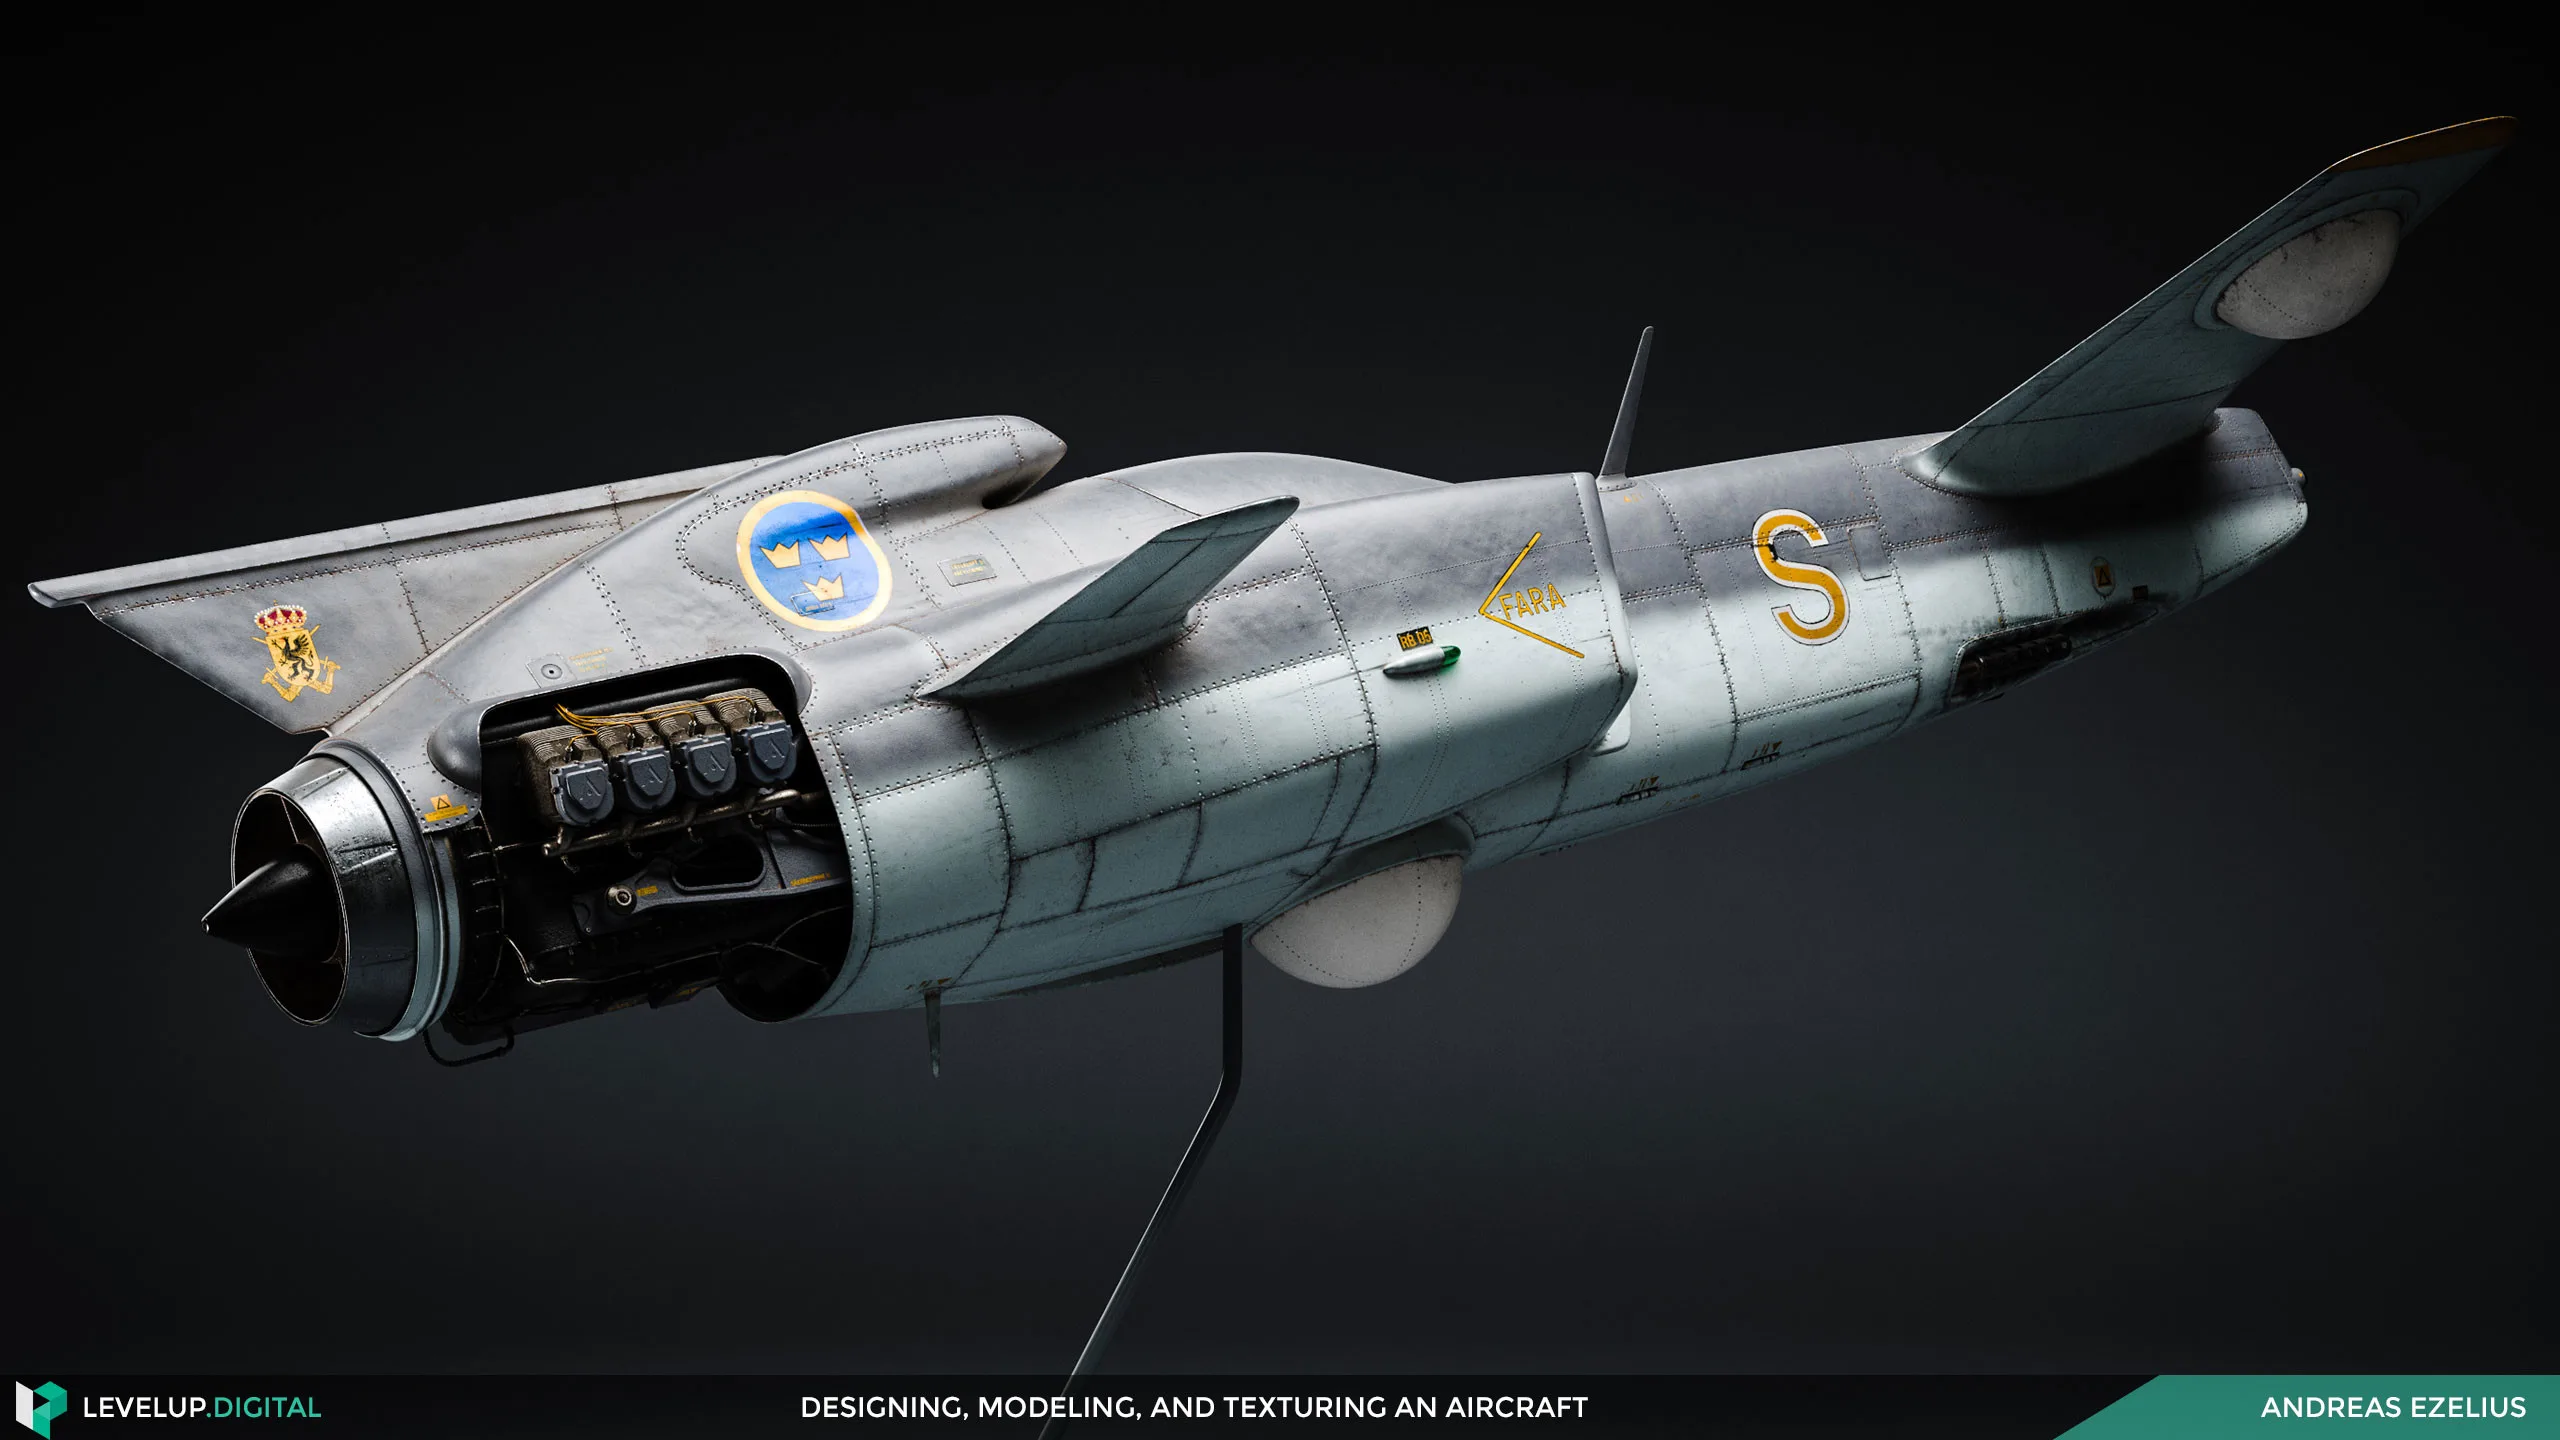 Designing, Modeling, and Texturing an Aircraft | Andreas Ezelius